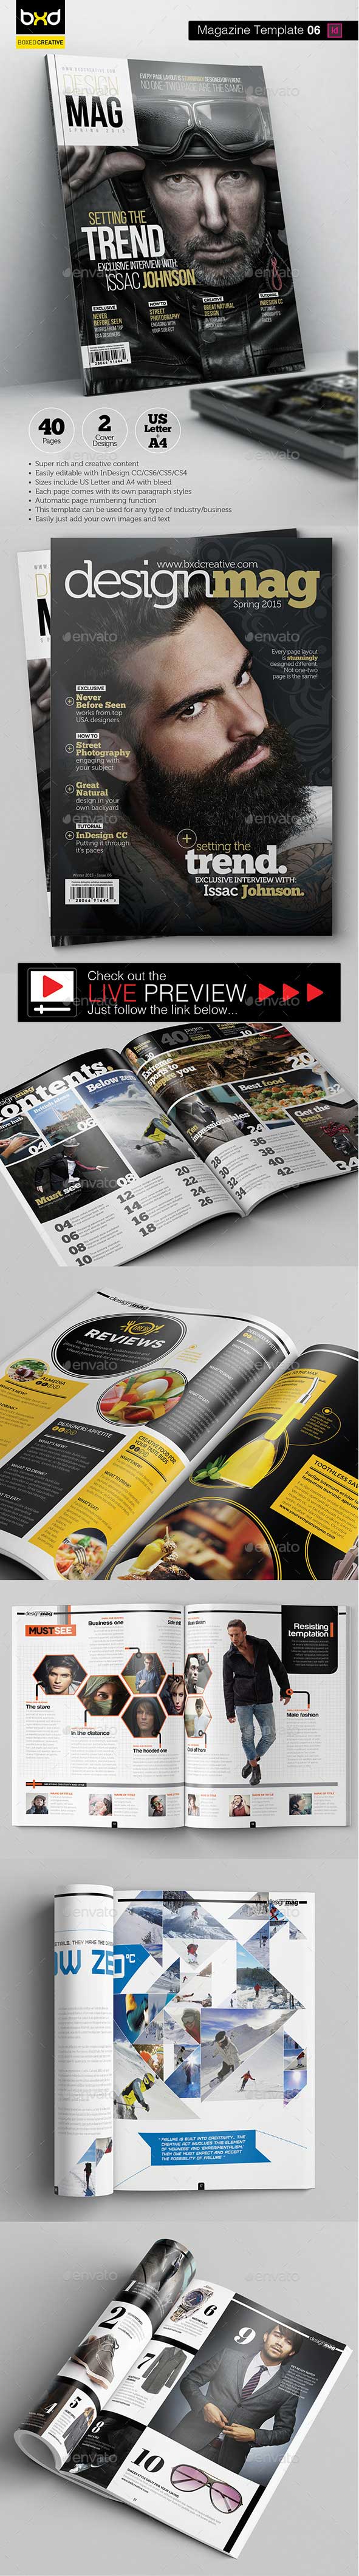 magazine-template-indesign-40-page-layout-v6